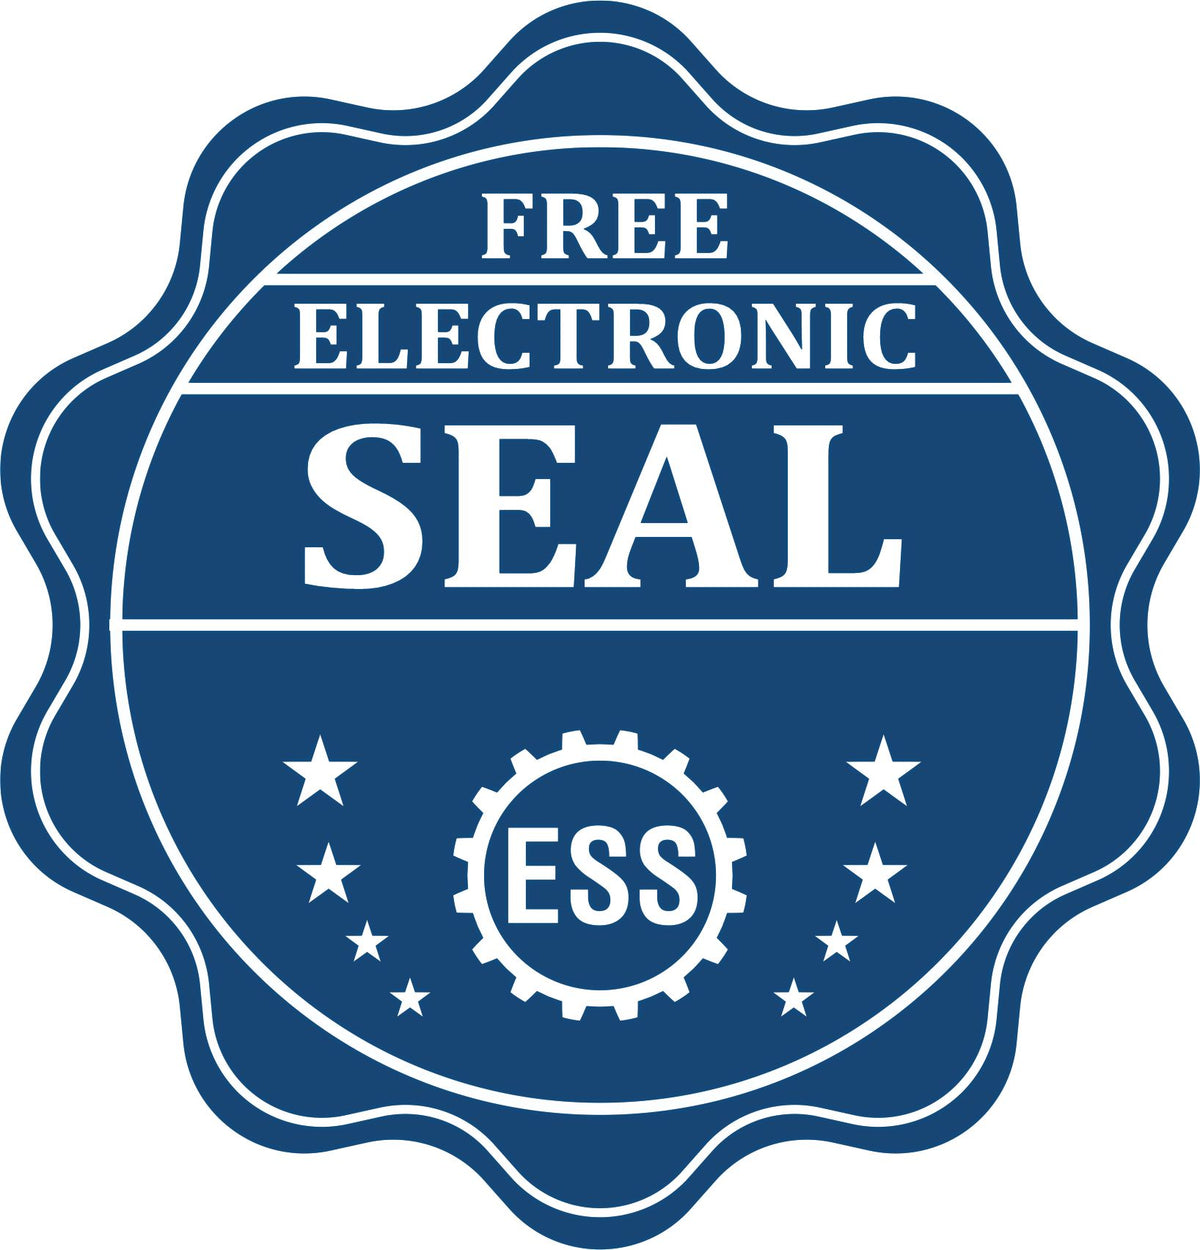 A badge showing a free electronic seal for the Slim Pre-Inked Oklahoma Architect Seal Stamp with stars and the ESS gear on the emblem.